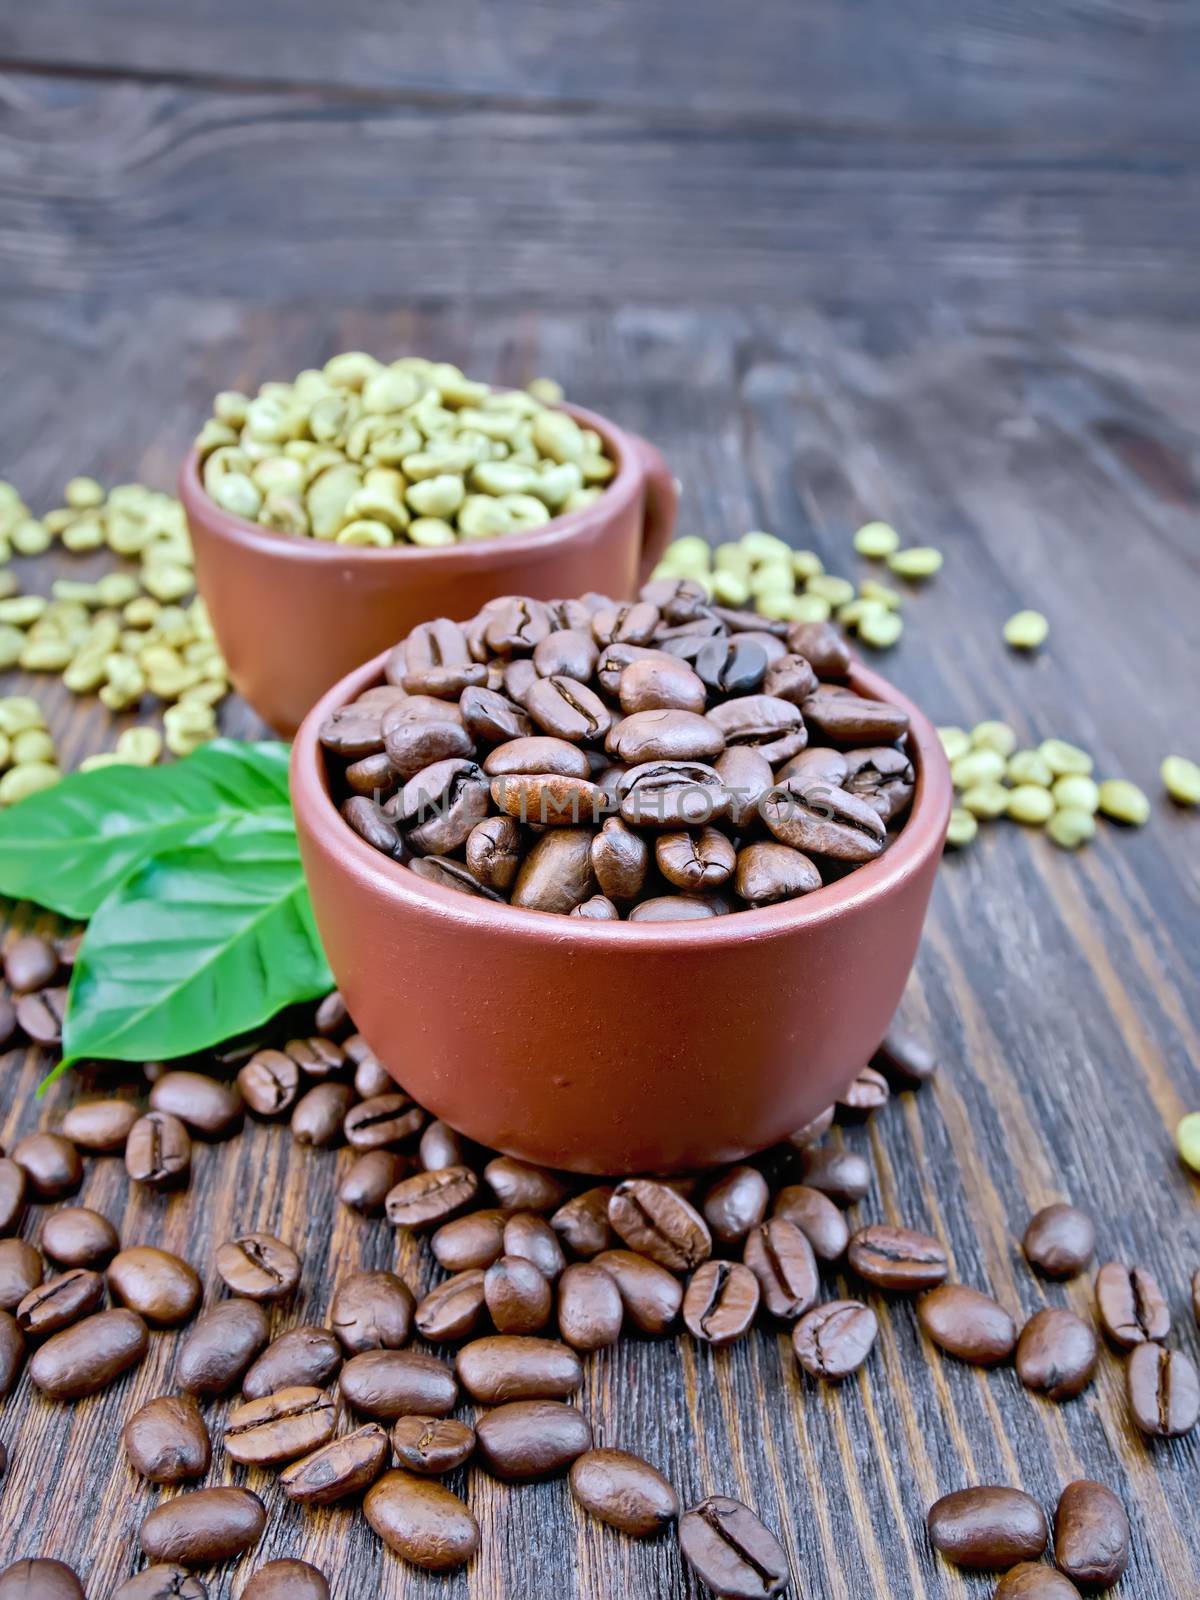 Grains of green and black coffee in brown clay cups and on a table with leaves on a wooden plank background